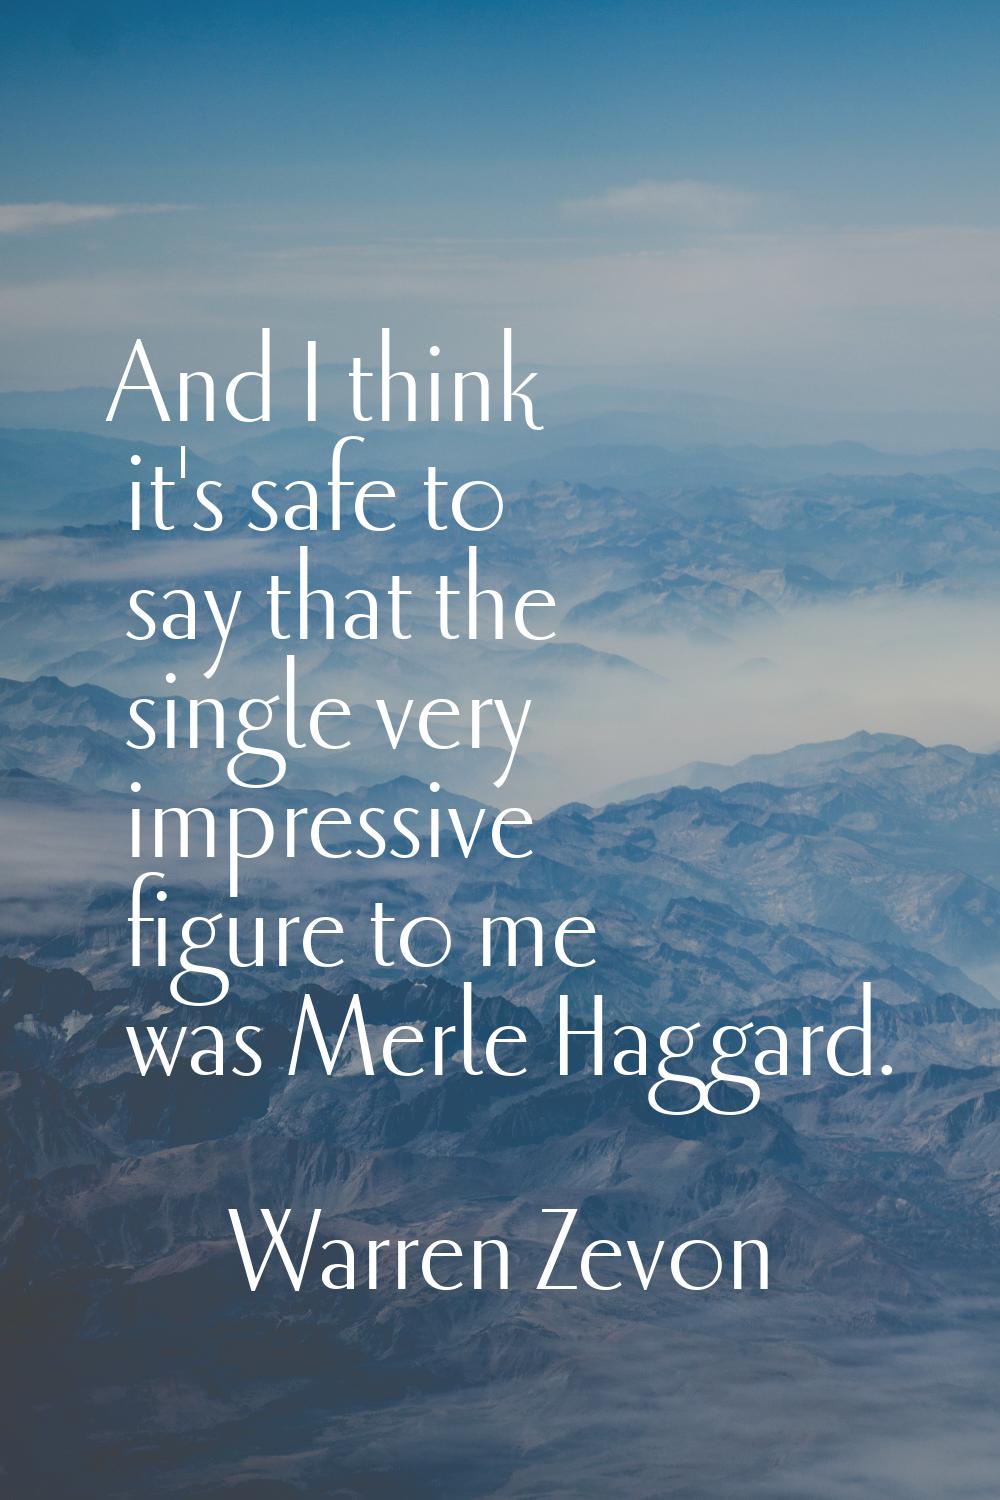 And I think it's safe to say that the single very impressive figure to me was Merle Haggard.